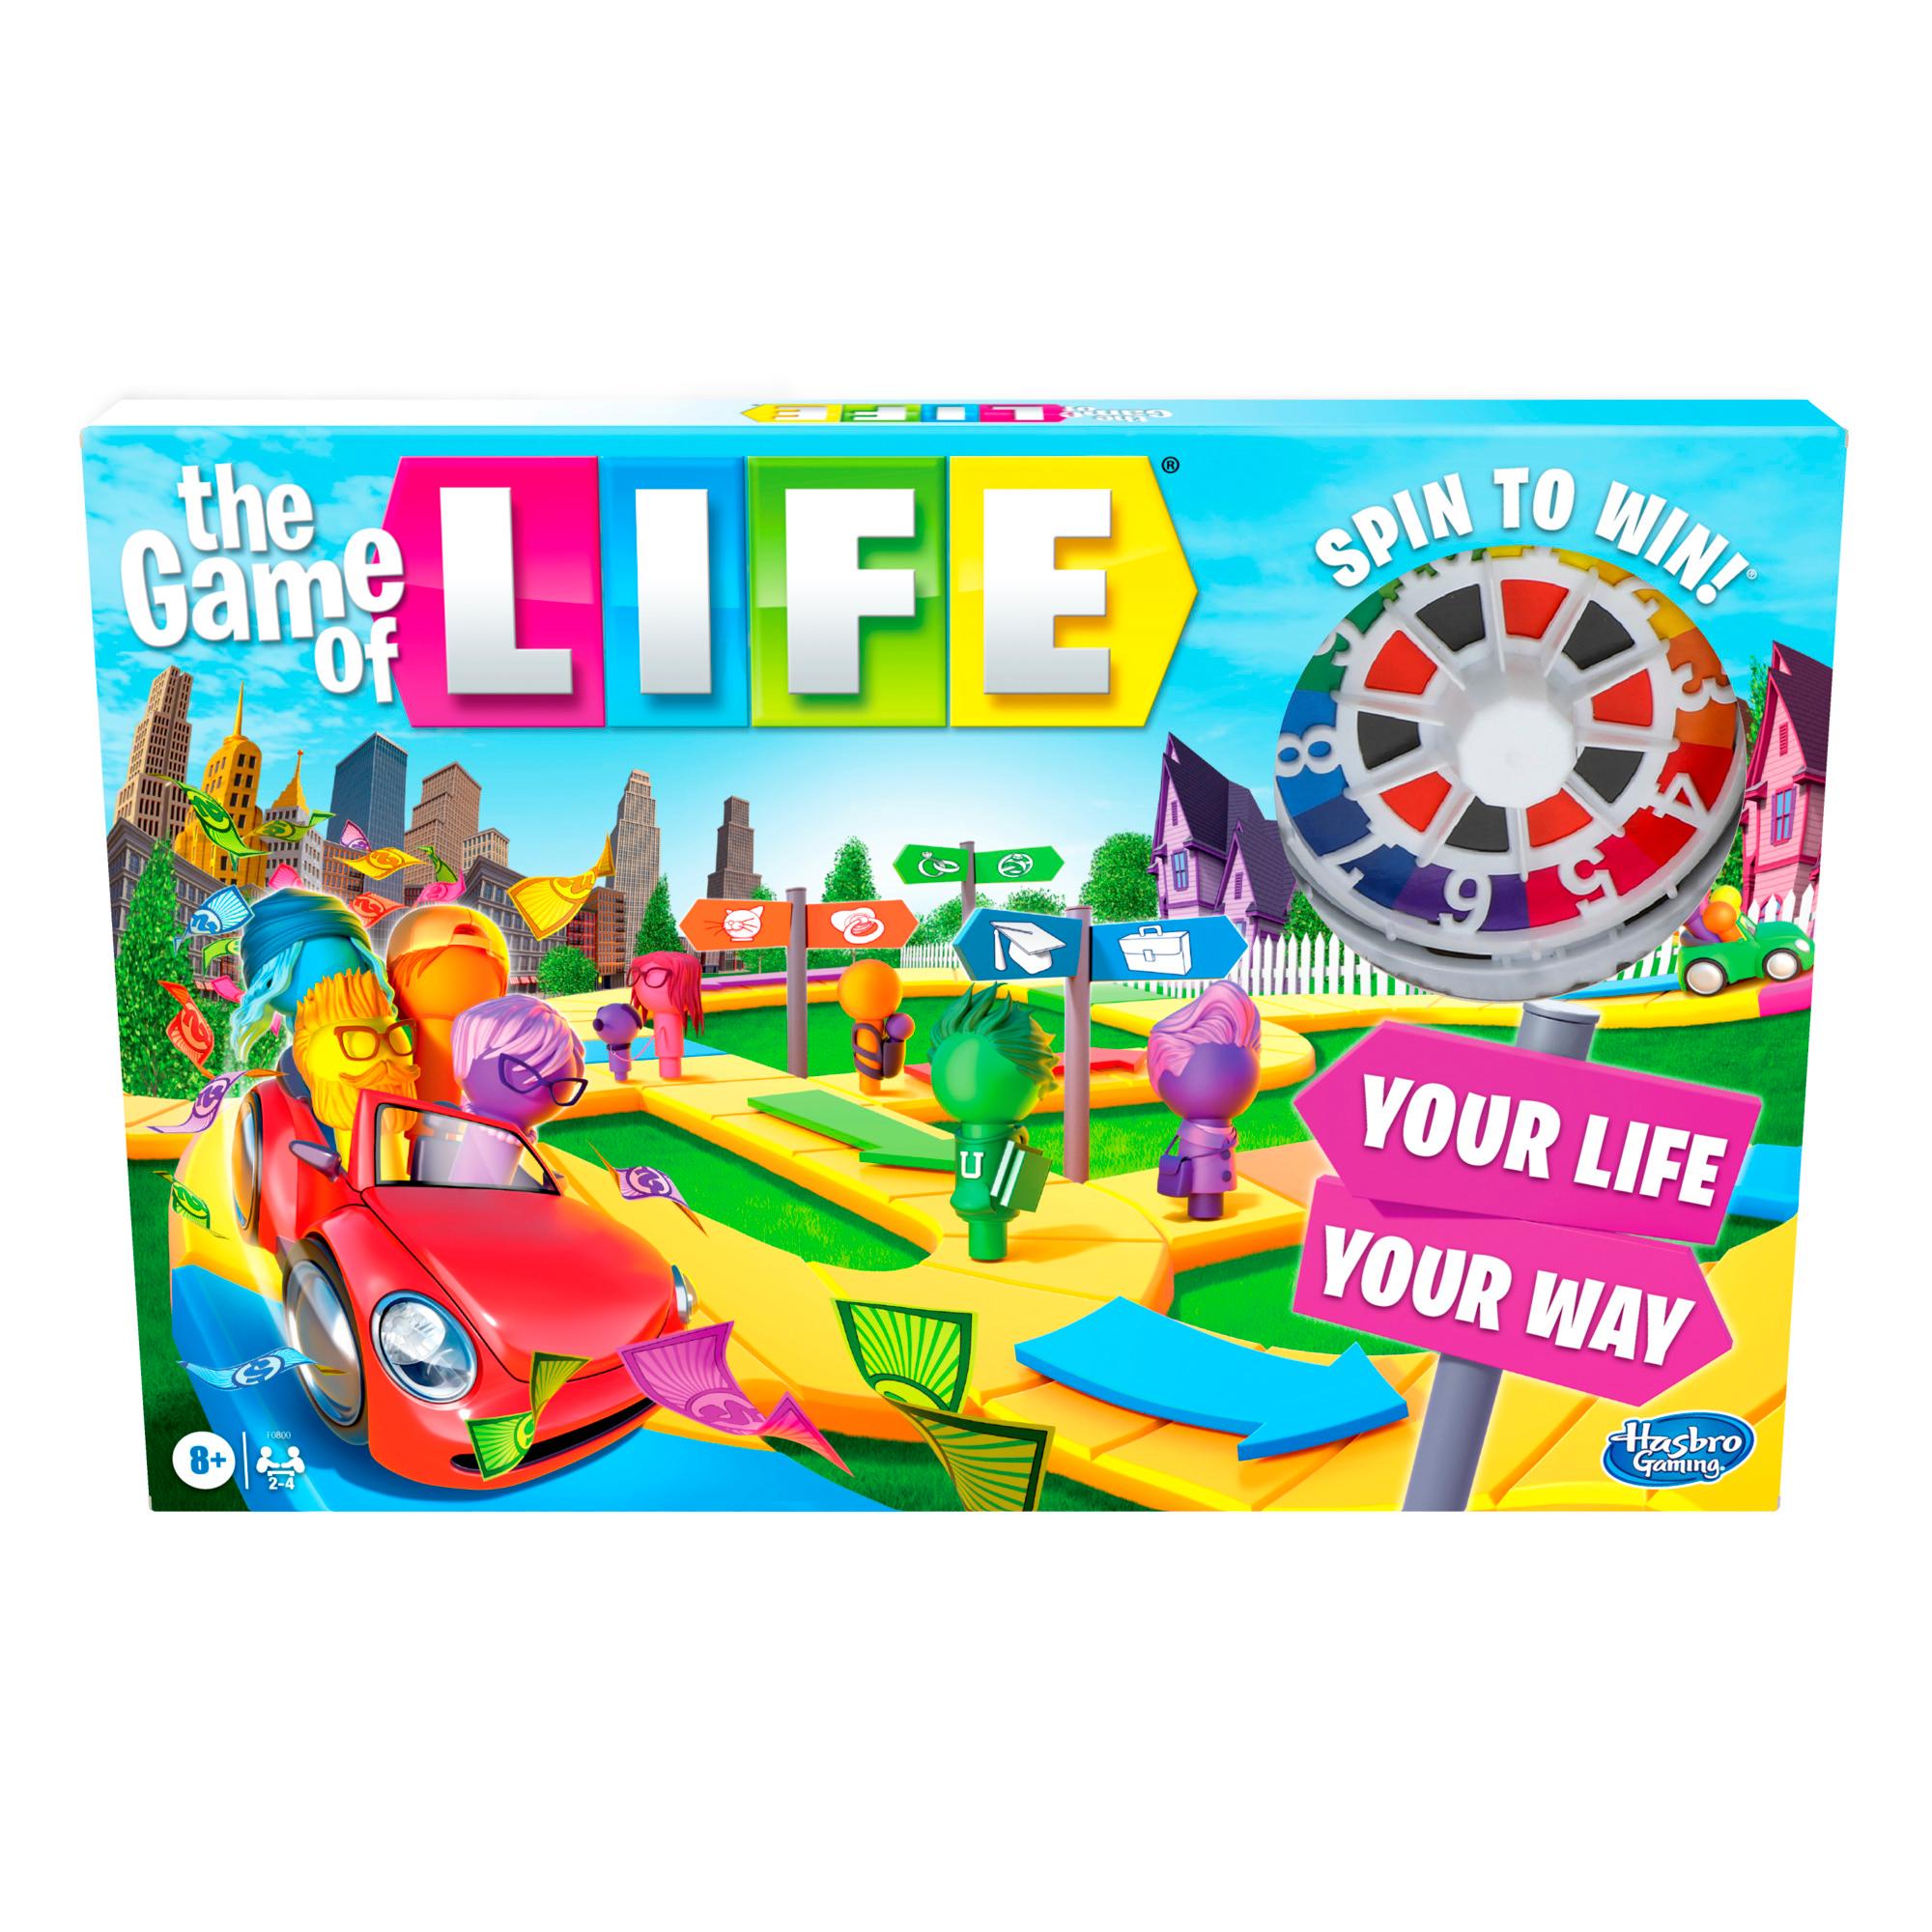 the-game-of-life-game-family-board-game-for-2-to-4-players-for-kids-ages-8-and-up-includes-colorful-pegs-hasbro-games